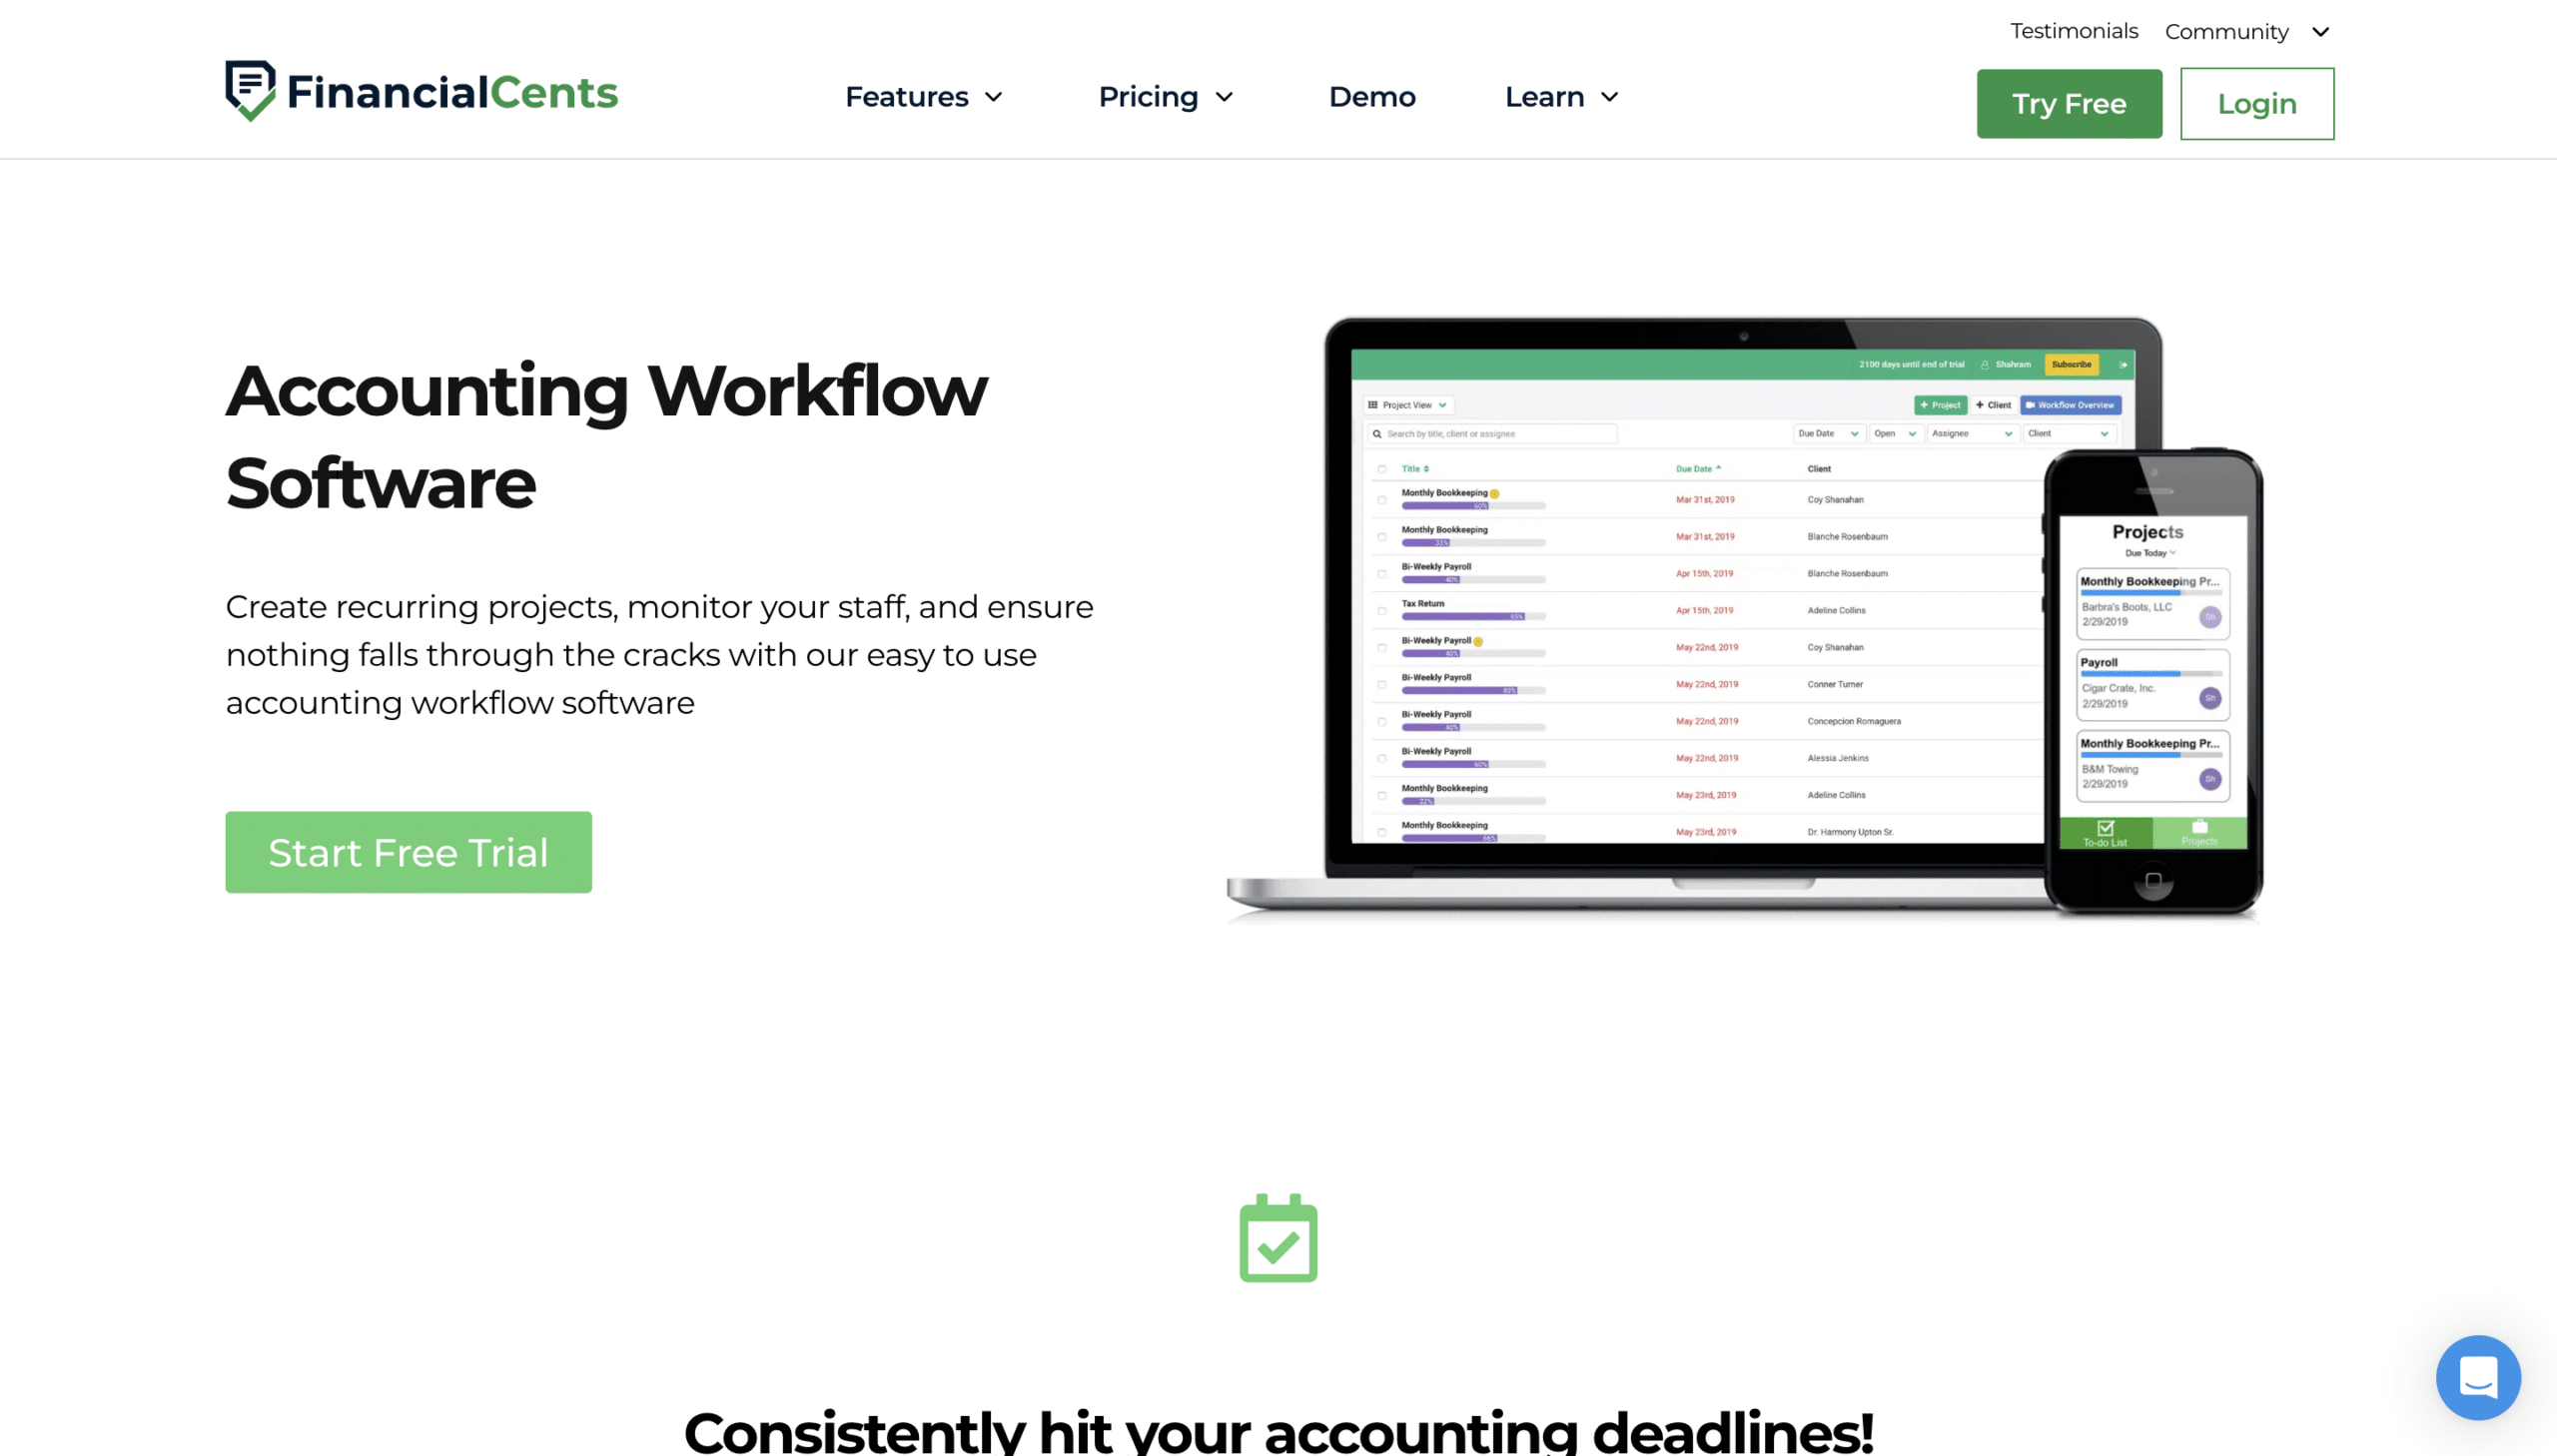 Accounting Workflow Software Product Page